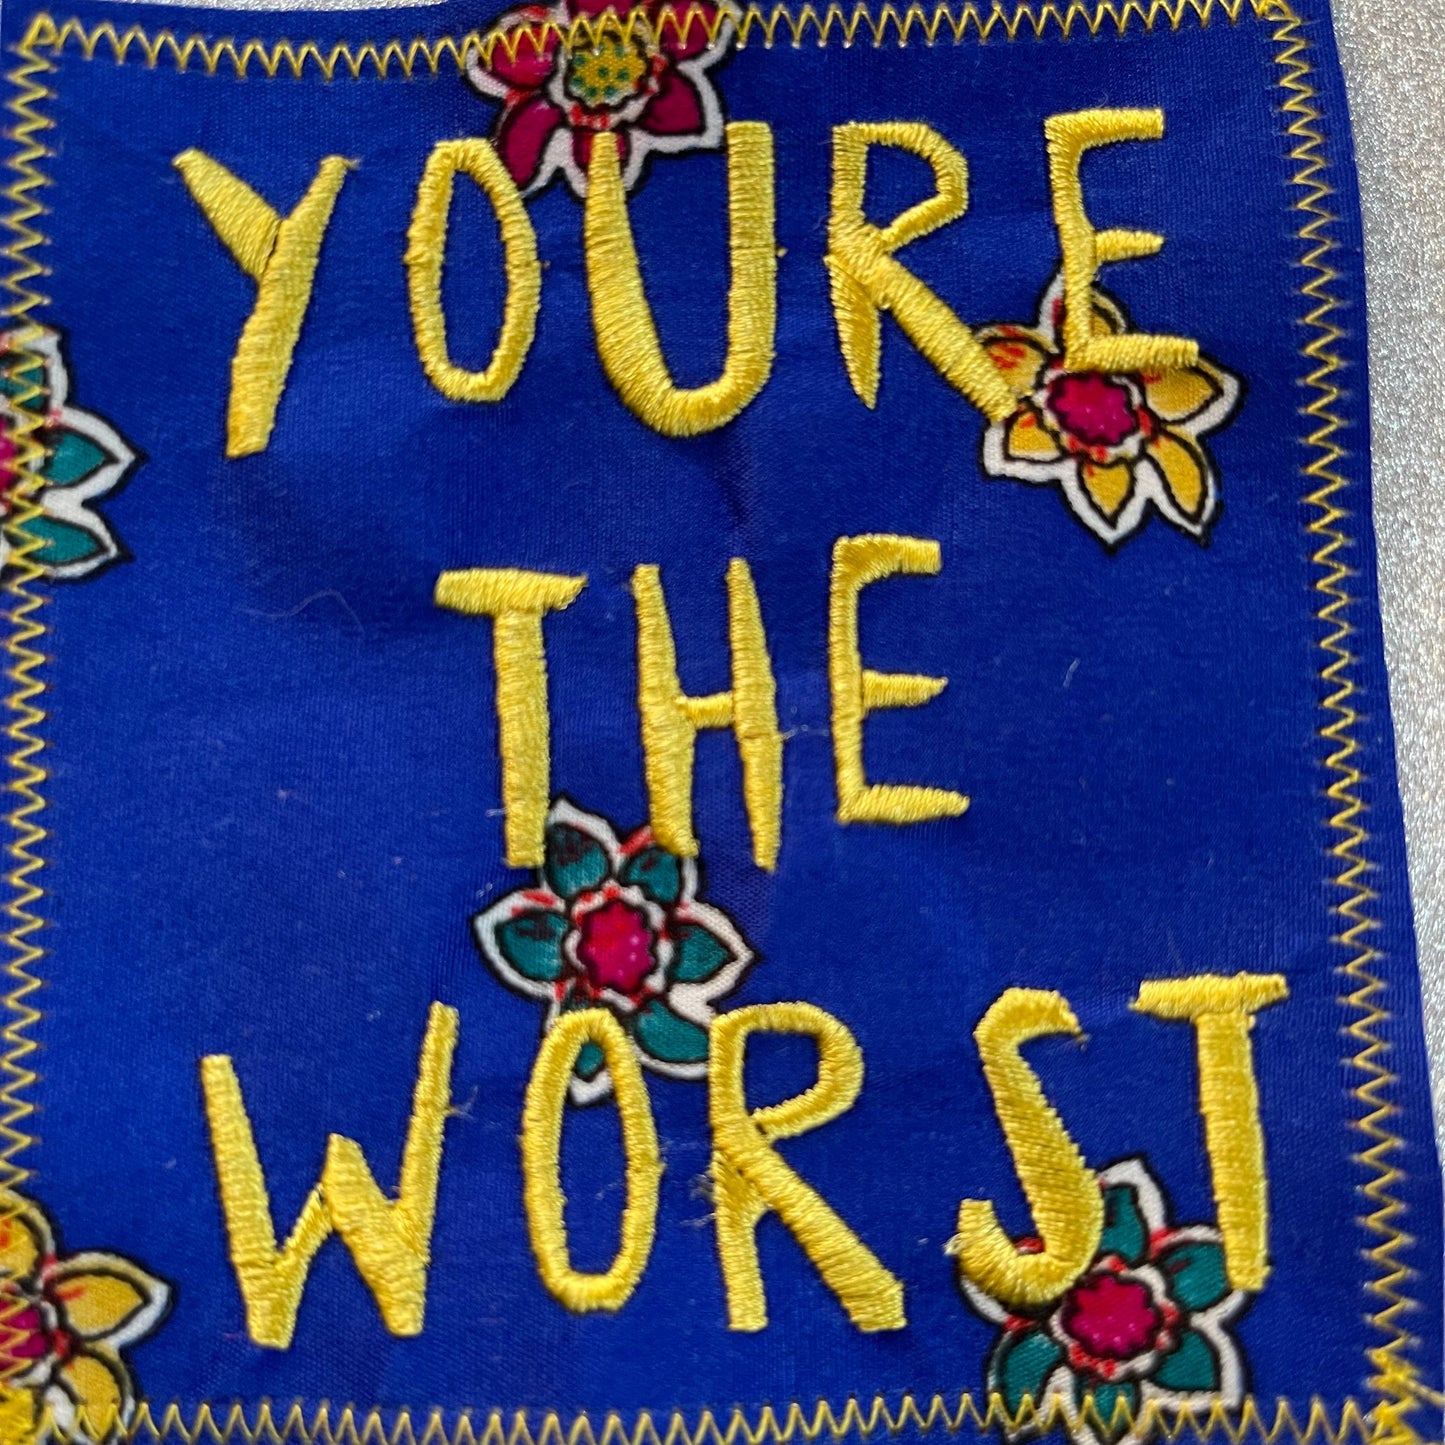 You’re The Worst Embroidered Patch